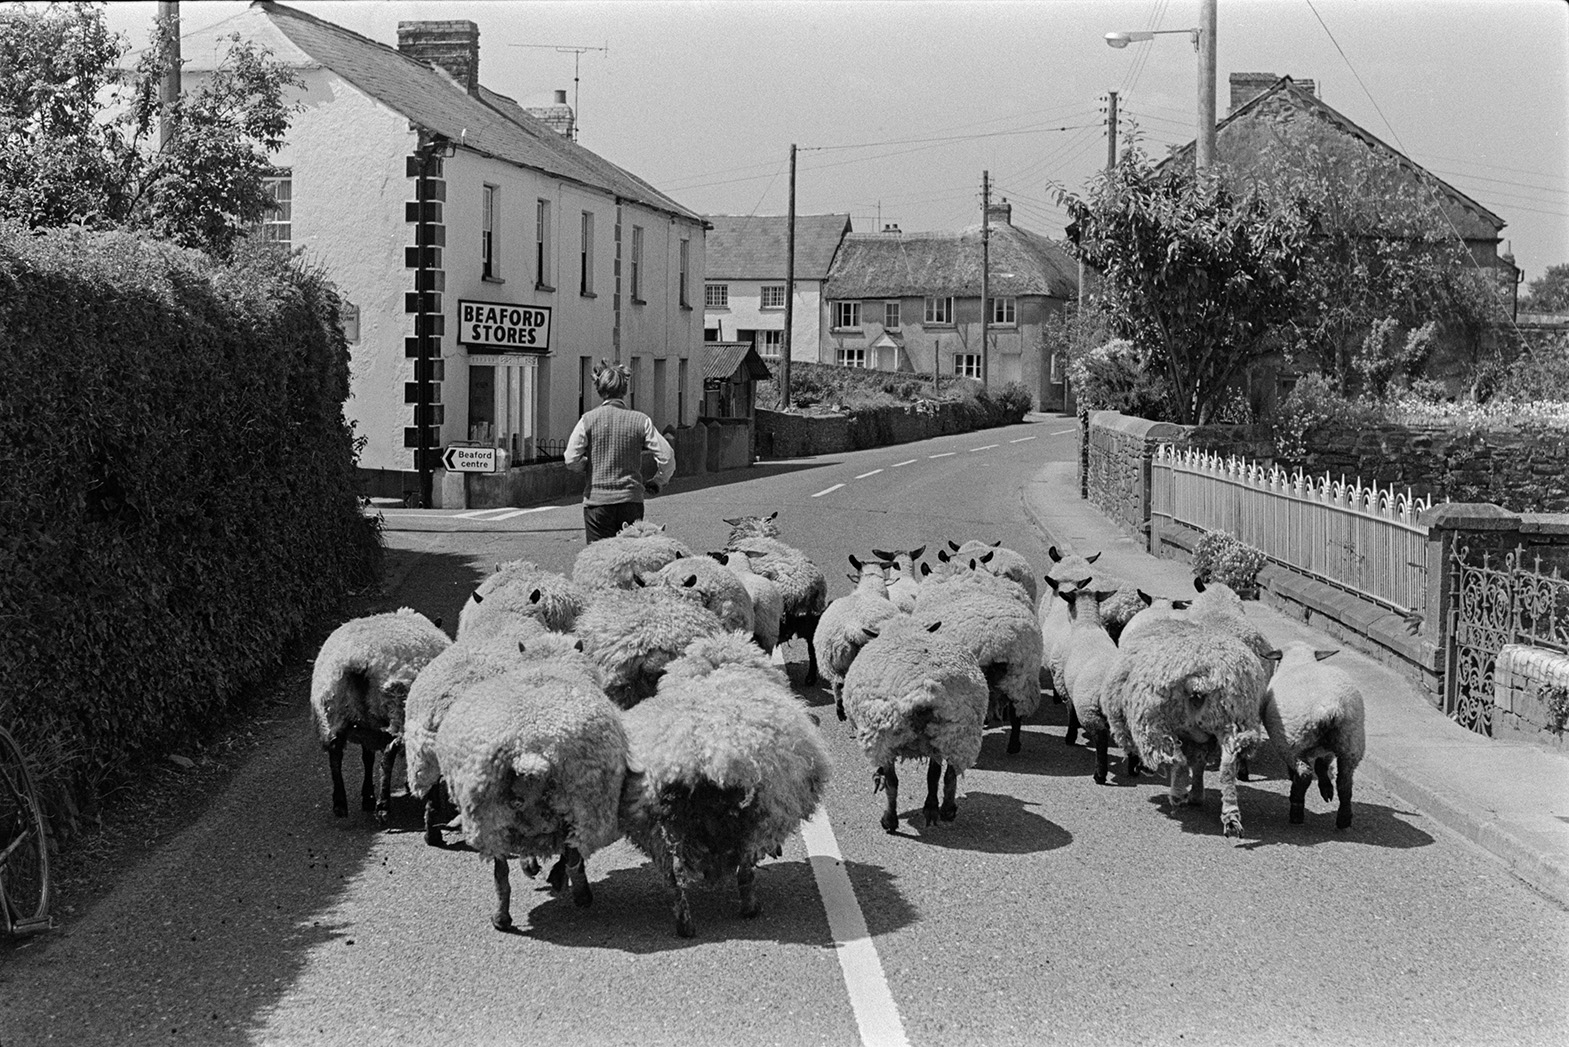 Ivor Bourne leading a small flock of sheep through street a street in Beaford, past the shop front of Beaford Stores.